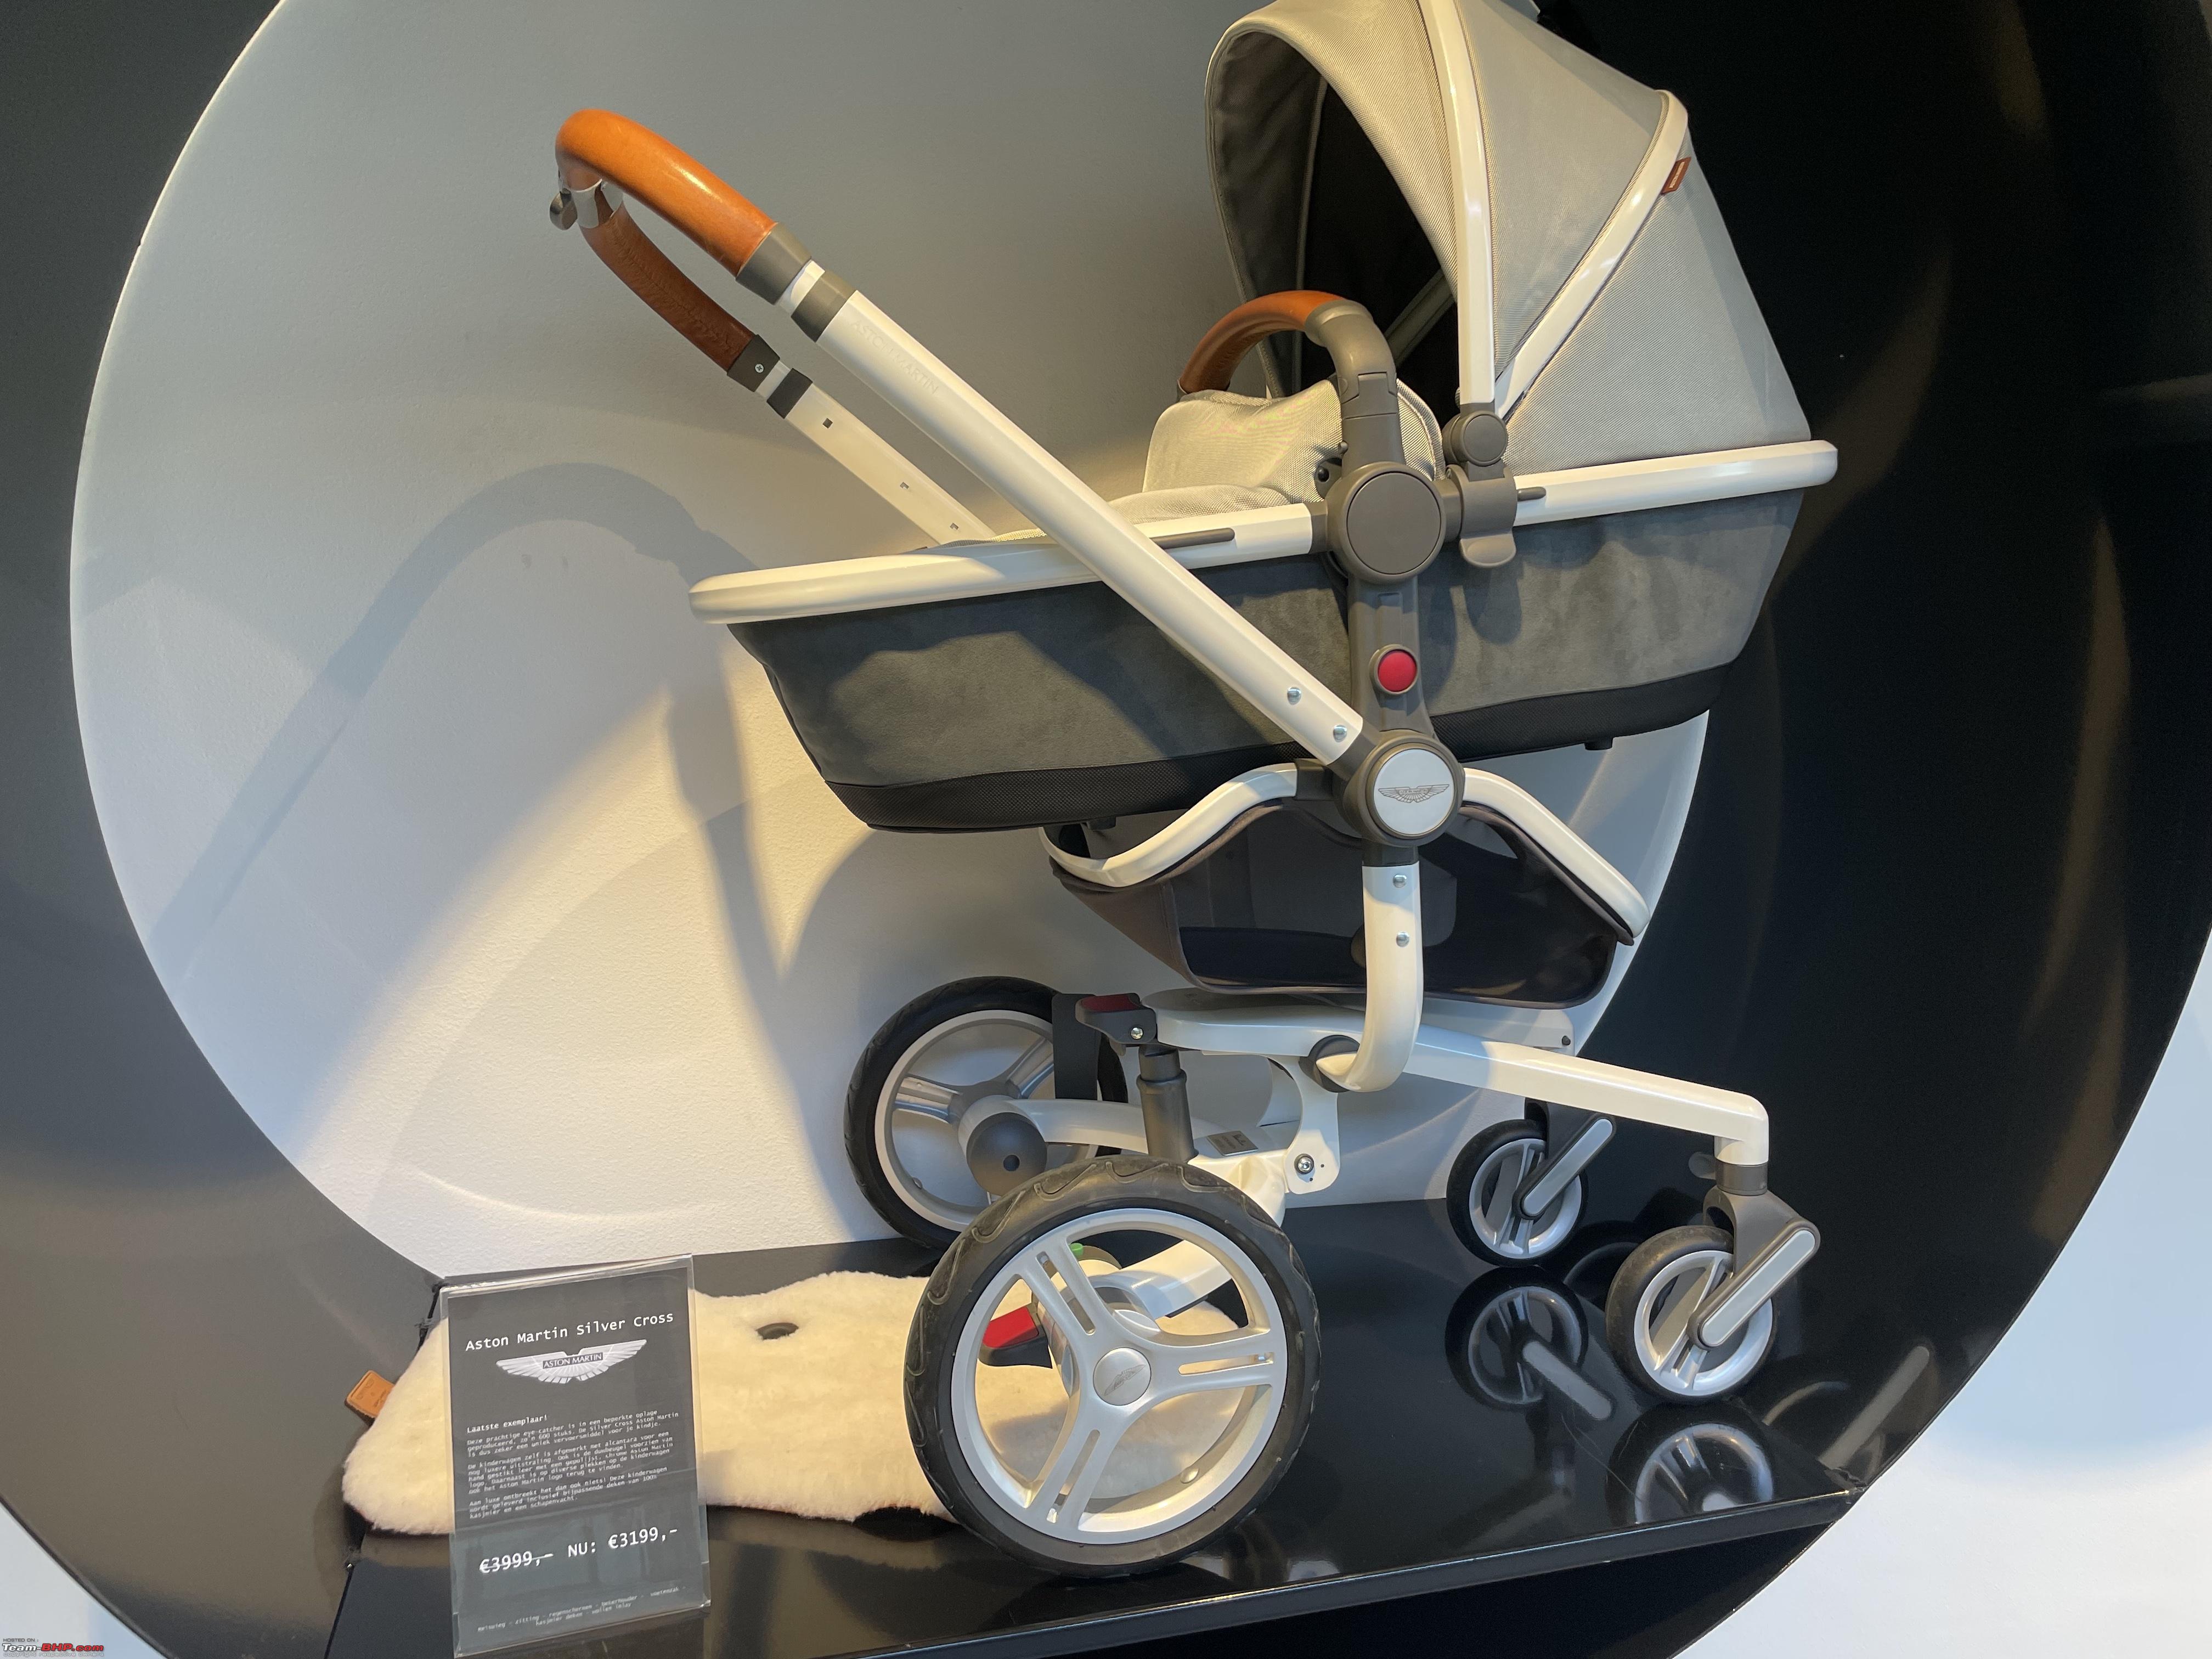 The latest and greatest from Aston Martin | A Baby Pram - Team-BHP